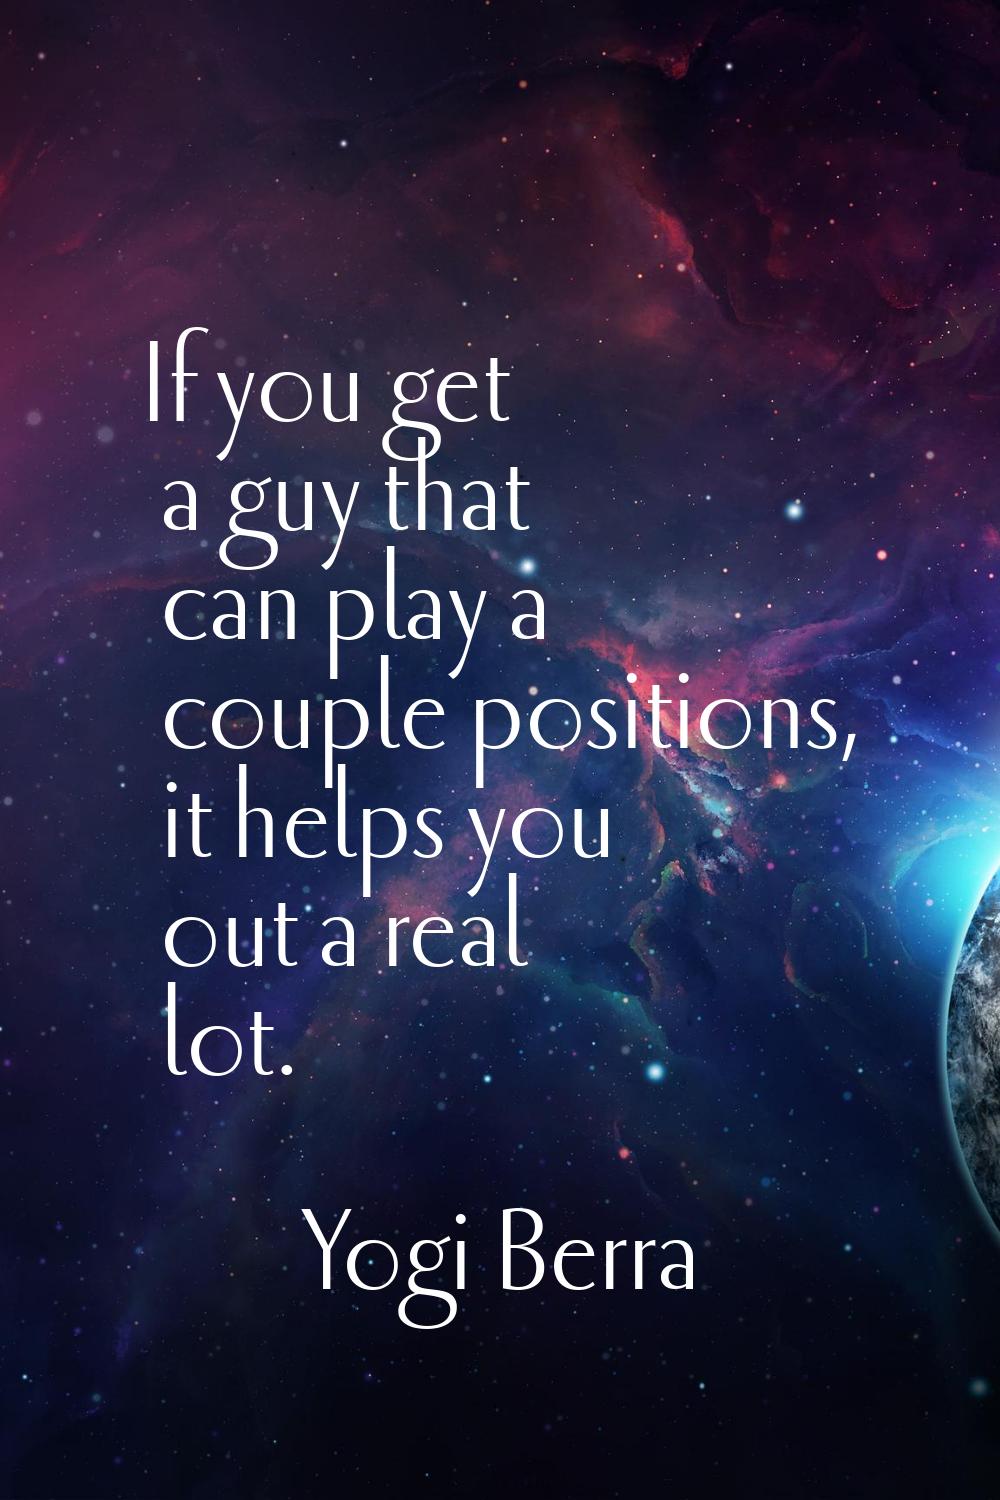 If you get a guy that can play a couple positions, it helps you out a real lot.